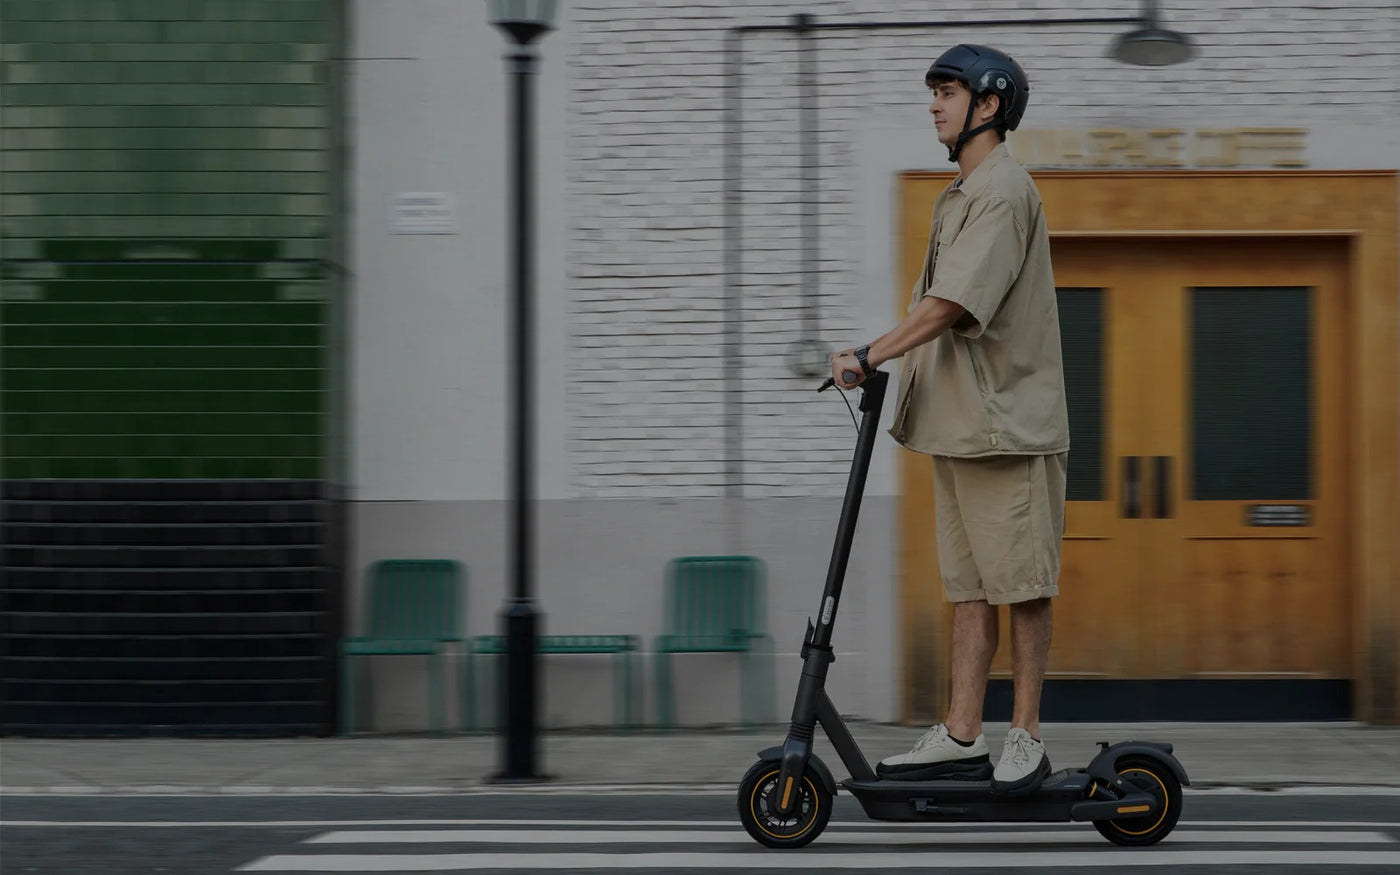 Segway Ninebot Electric Adult Waterproof Scooter Image Download 9